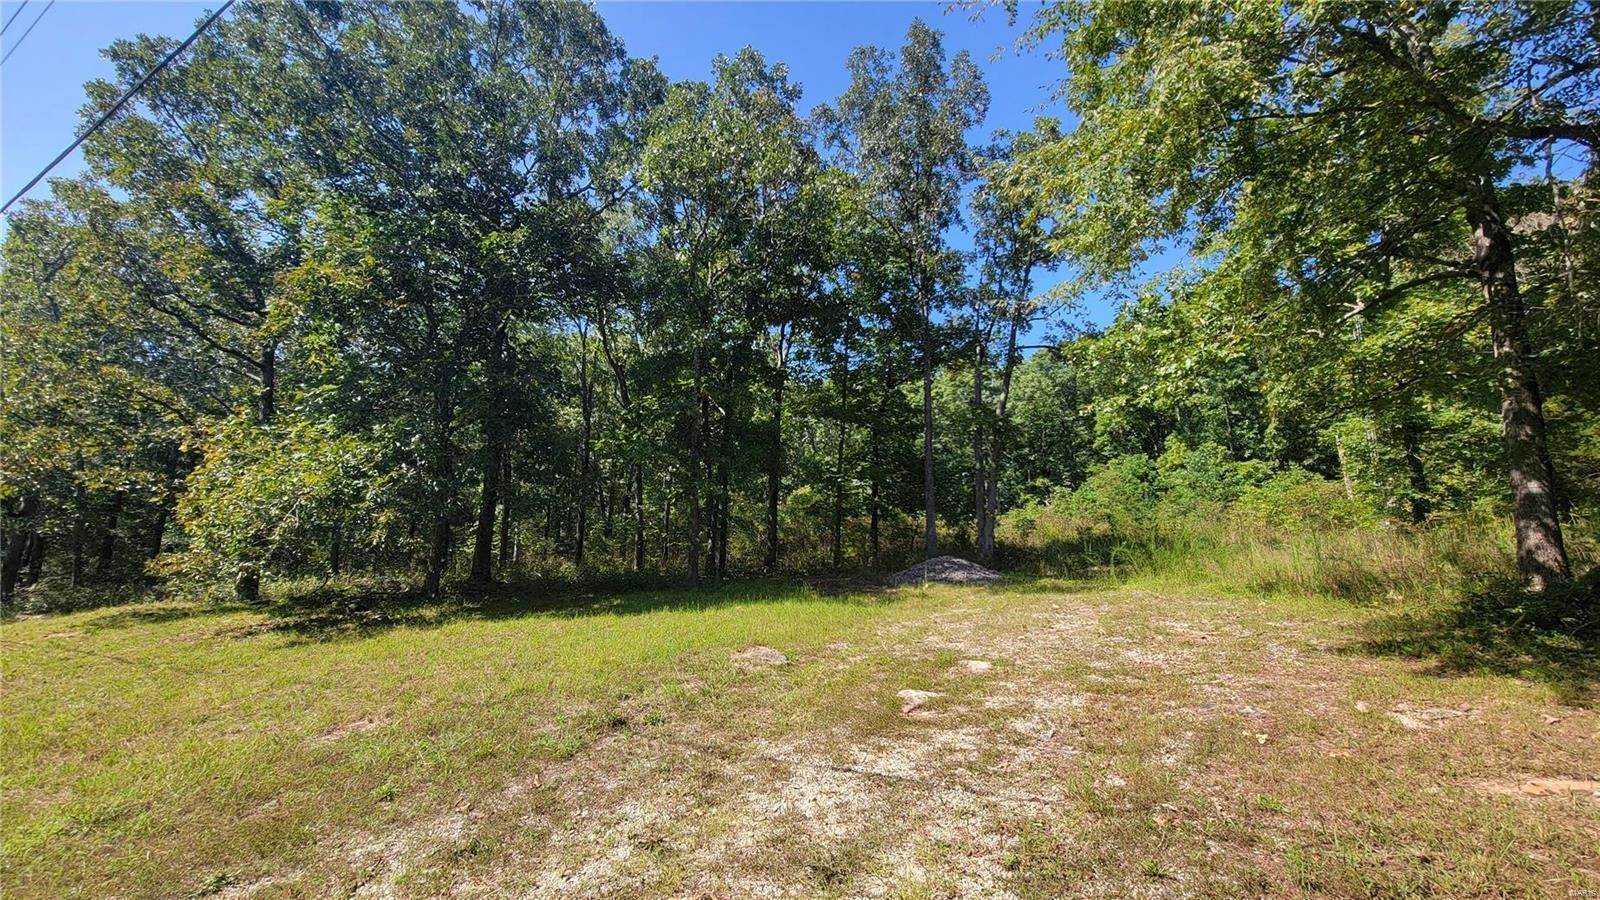 7. Land for Sale at Lot 503 N. Deer Trail Fredericktown, Missouri 63645 United States